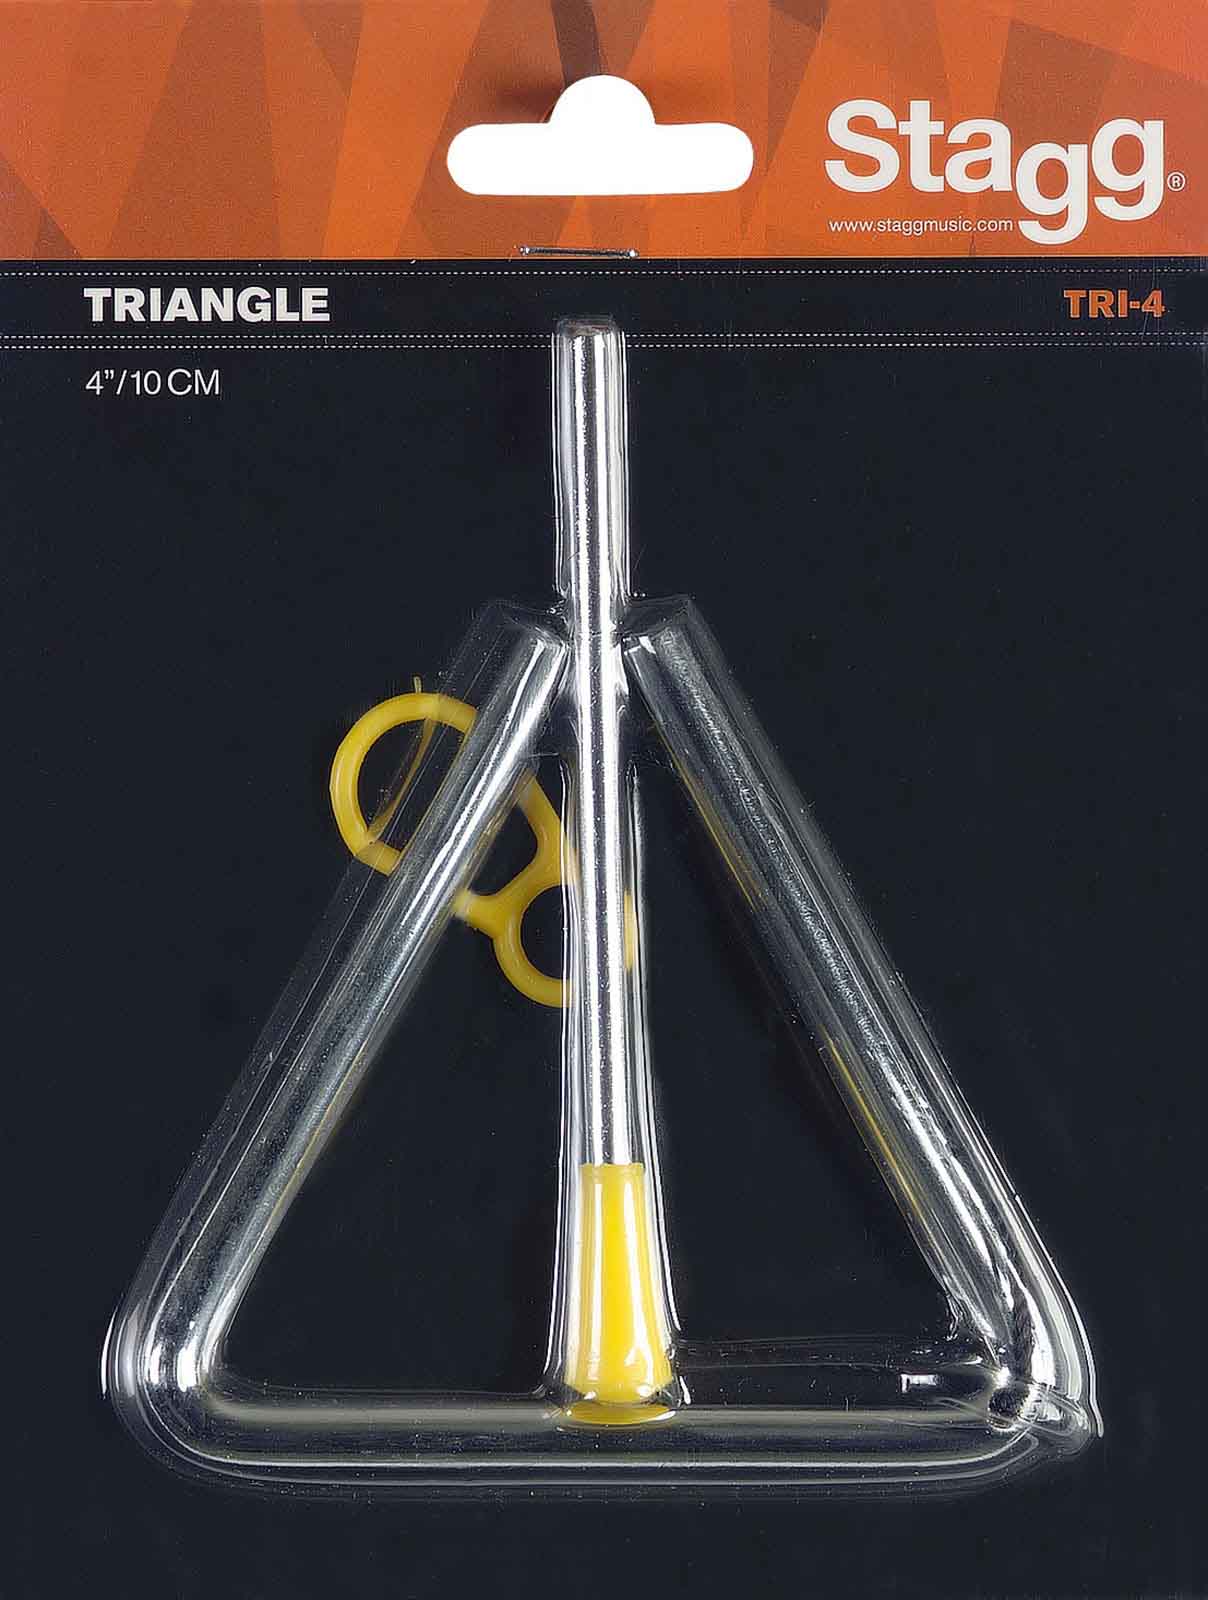 TRIANGLE STAGG 4